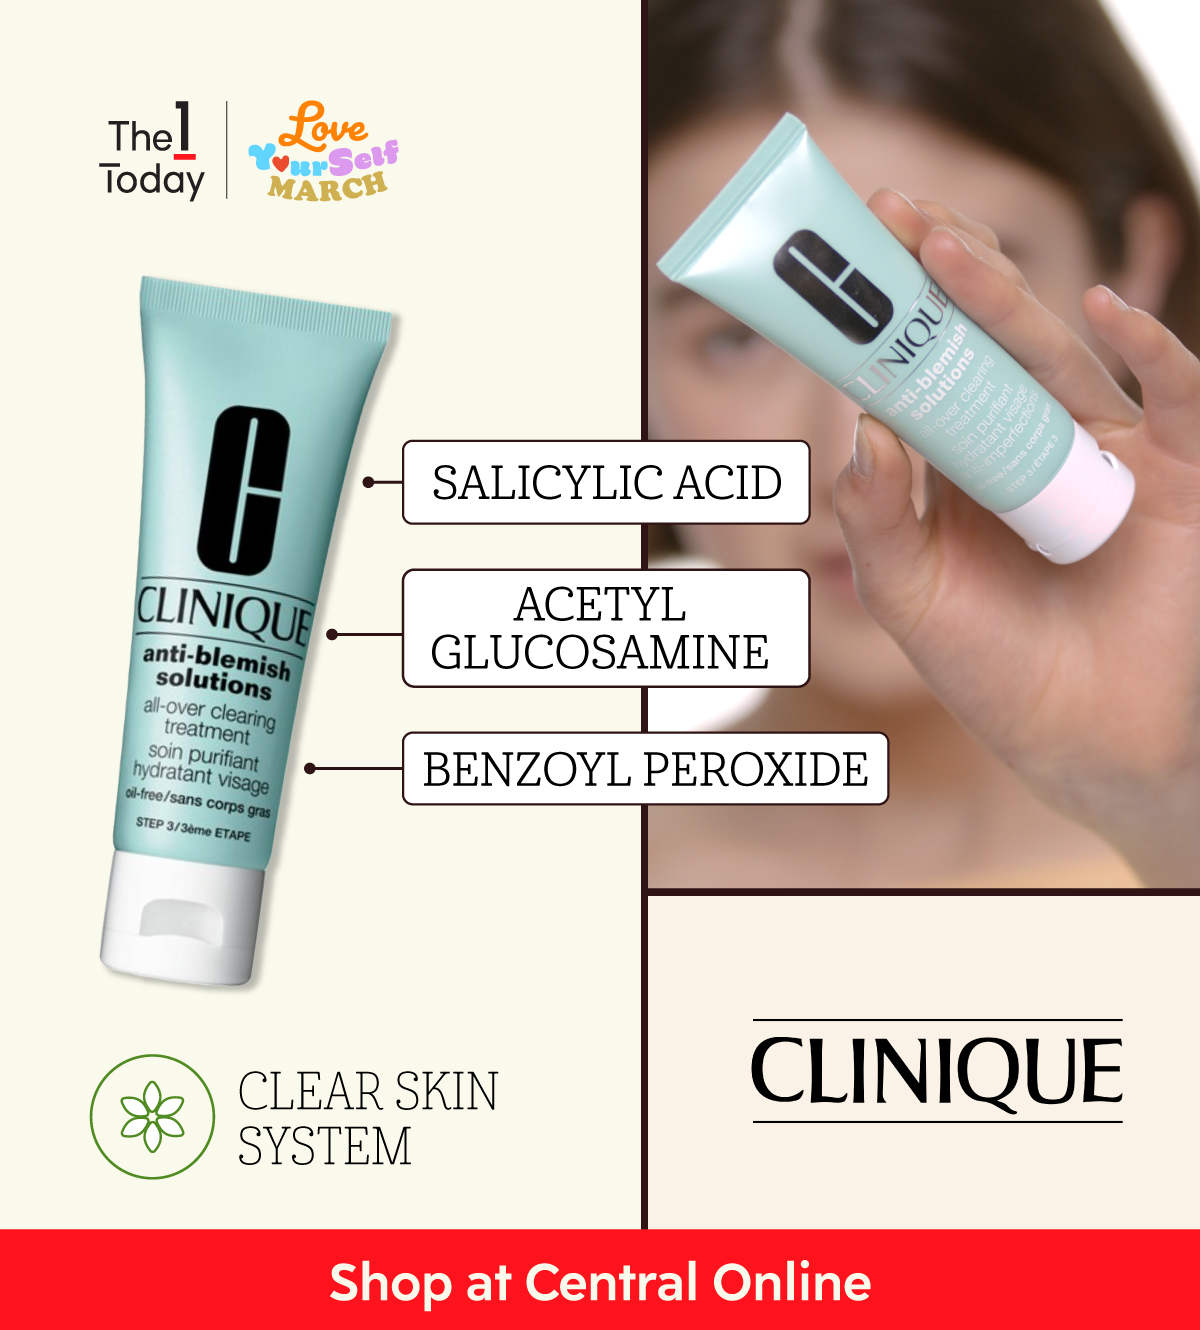 CLINIQUE ANTI-BLEMISH SOLUTIONS ALL-OVER CLEARING TREATMENT ราคา 1,100 บาท 